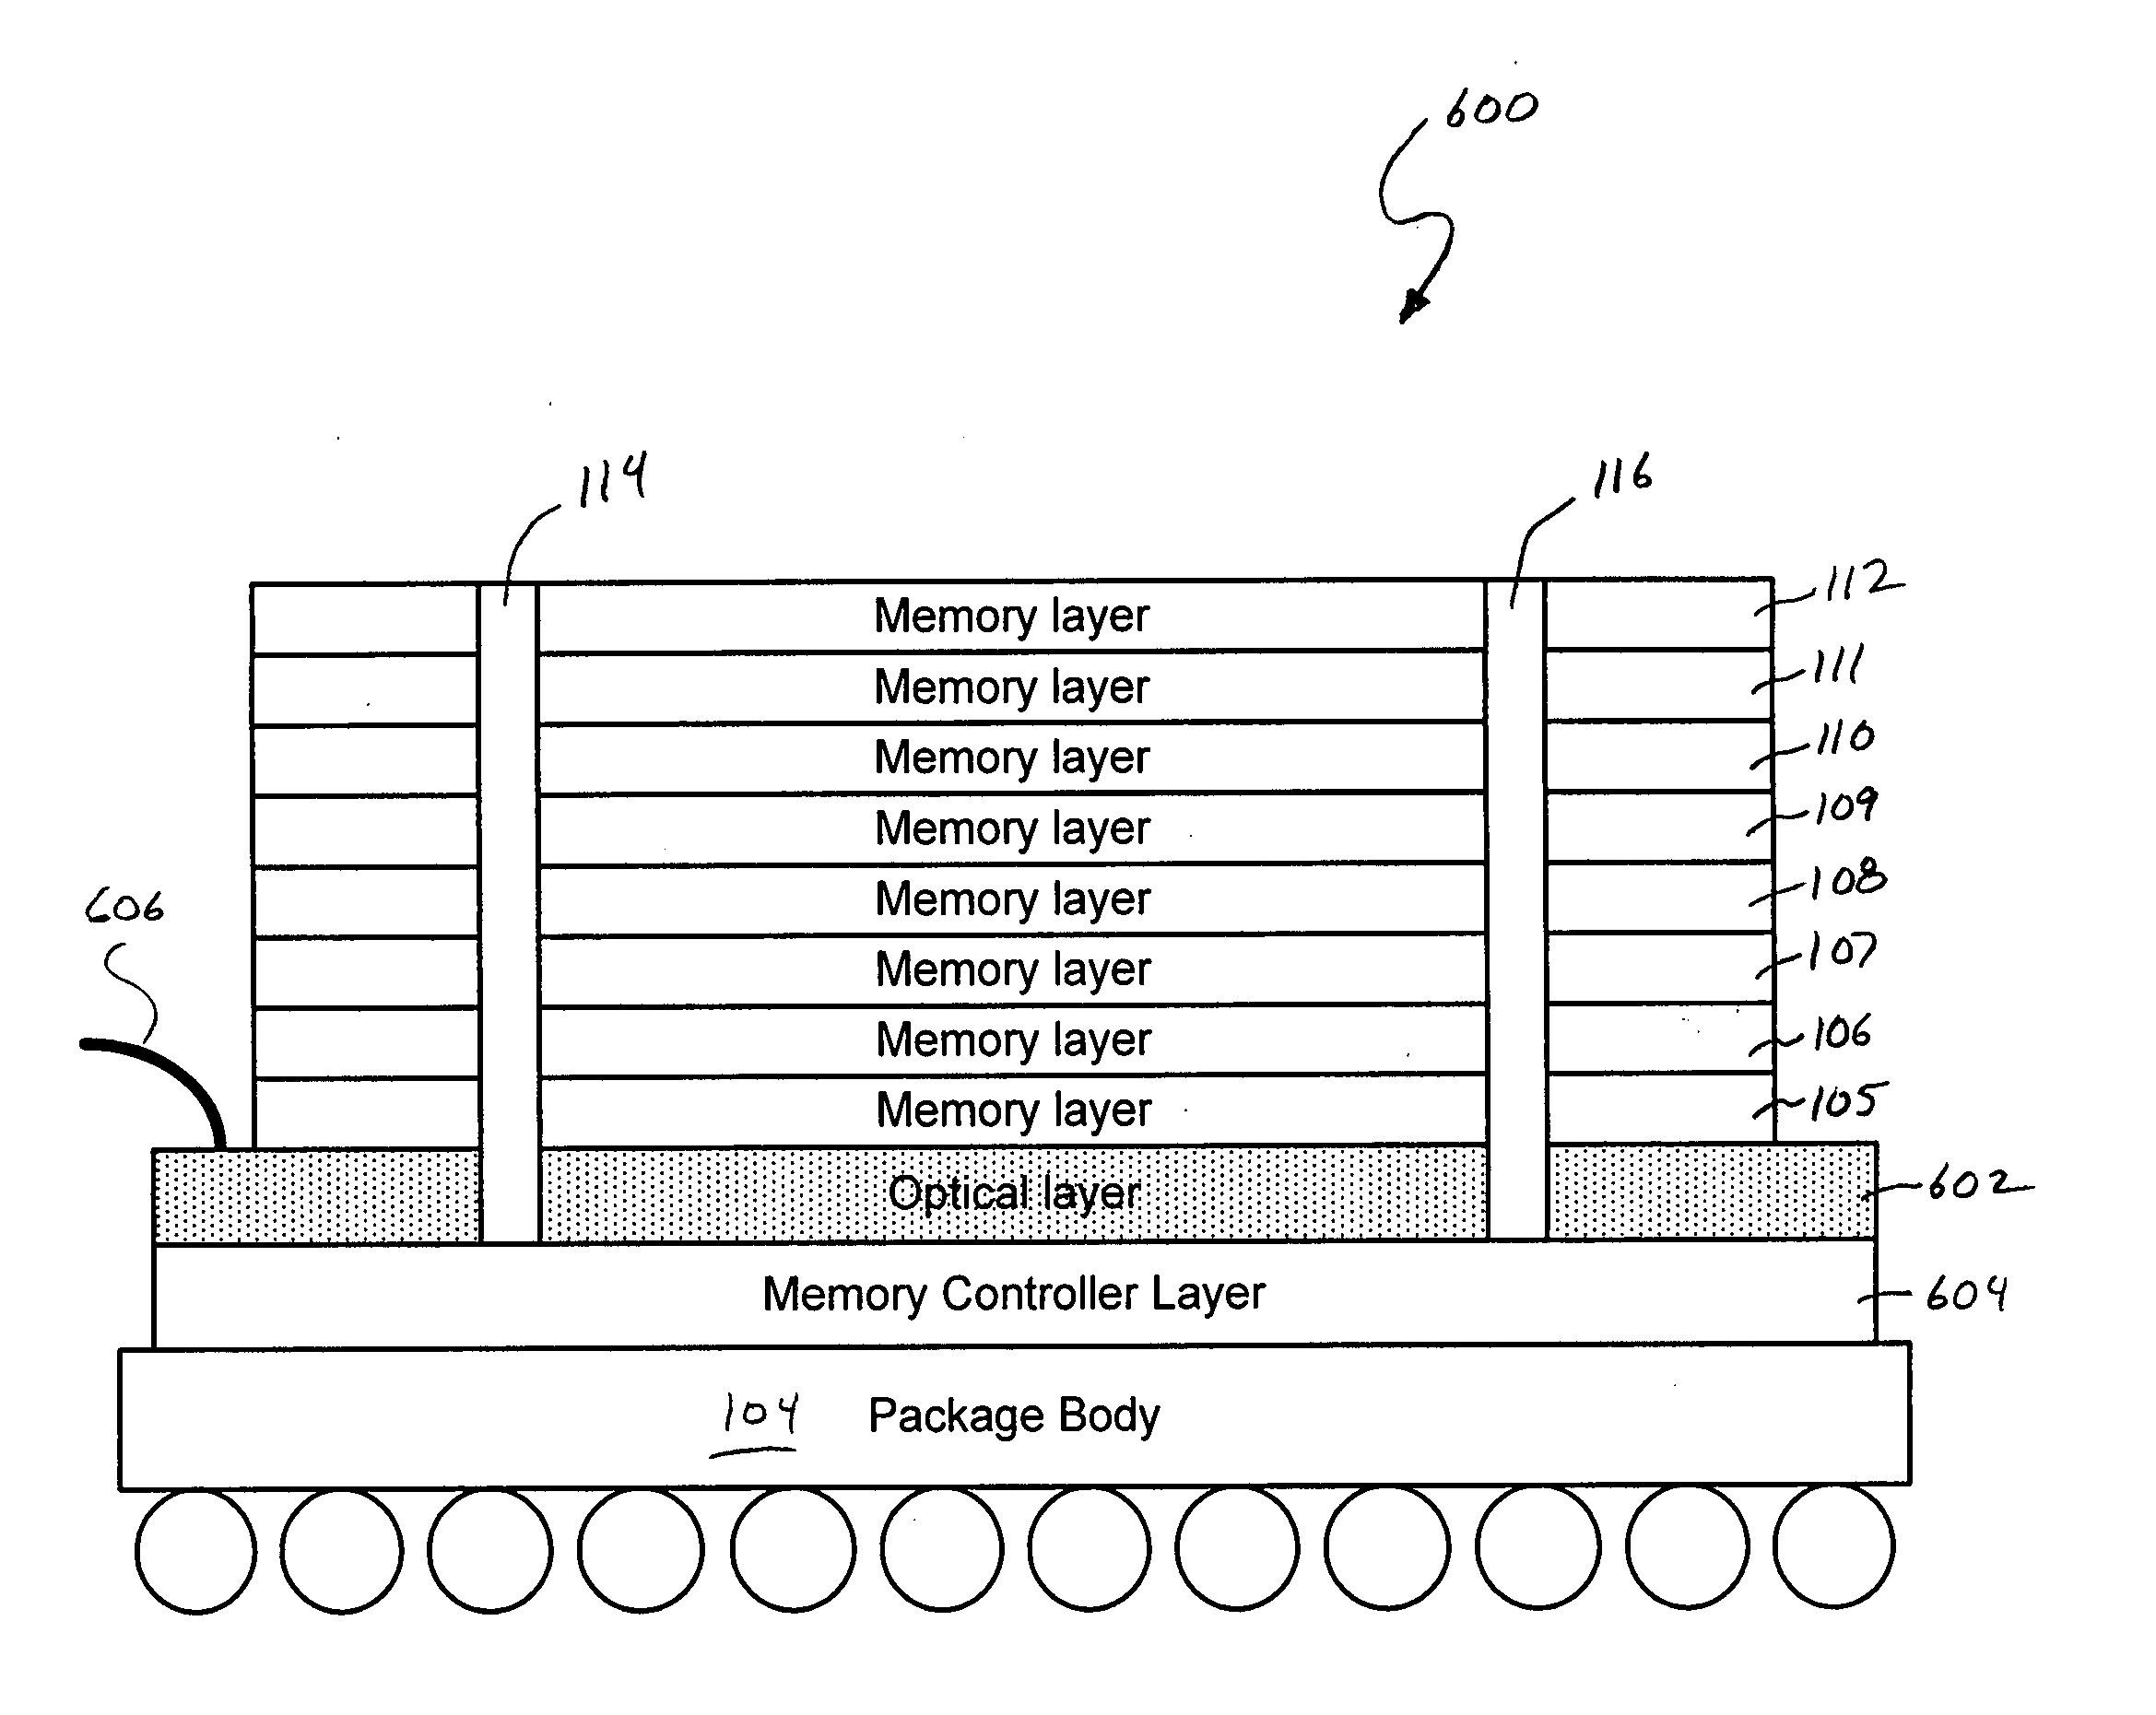 Three-dimensional memory module architectures